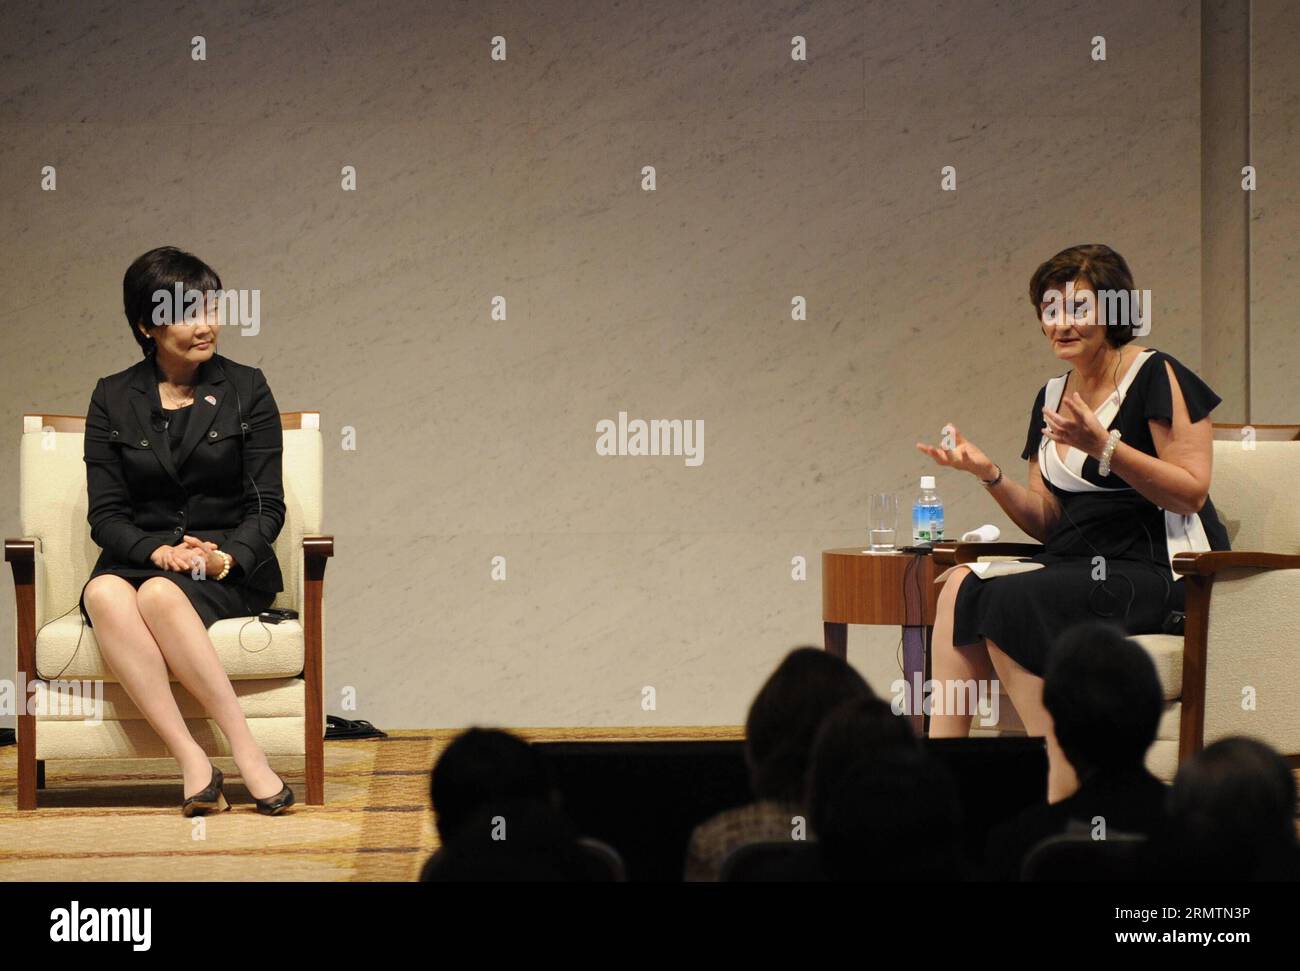 (140912) -- TOKYO, Sept. 12, 2014 -- Akie Abe (L), wife of Japanese Prime Minister Shizo Abe and Cherie Blair (R), wife of former British Prime Minister Tony Blair, have a special talk session titiled Toward a society where women shine during the opening forum of the World Assembly for Women in Tokyo , or WAW! Tokyo , in Tokyo, Japan, on Sept. 12, 2014. WAW! Tokyo 2014 will also have a roundtable discussion among participants from Japan and overseas on Saturday. ) JAPAN-TOKYO-WORLD ASSEMBLY FOR WOMEN Stringer PUBLICATIONxNOTxINxCHN   Tokyo Sept 12 2014 Akie ABE l wife of Japanese Prime Ministe Stock Photo